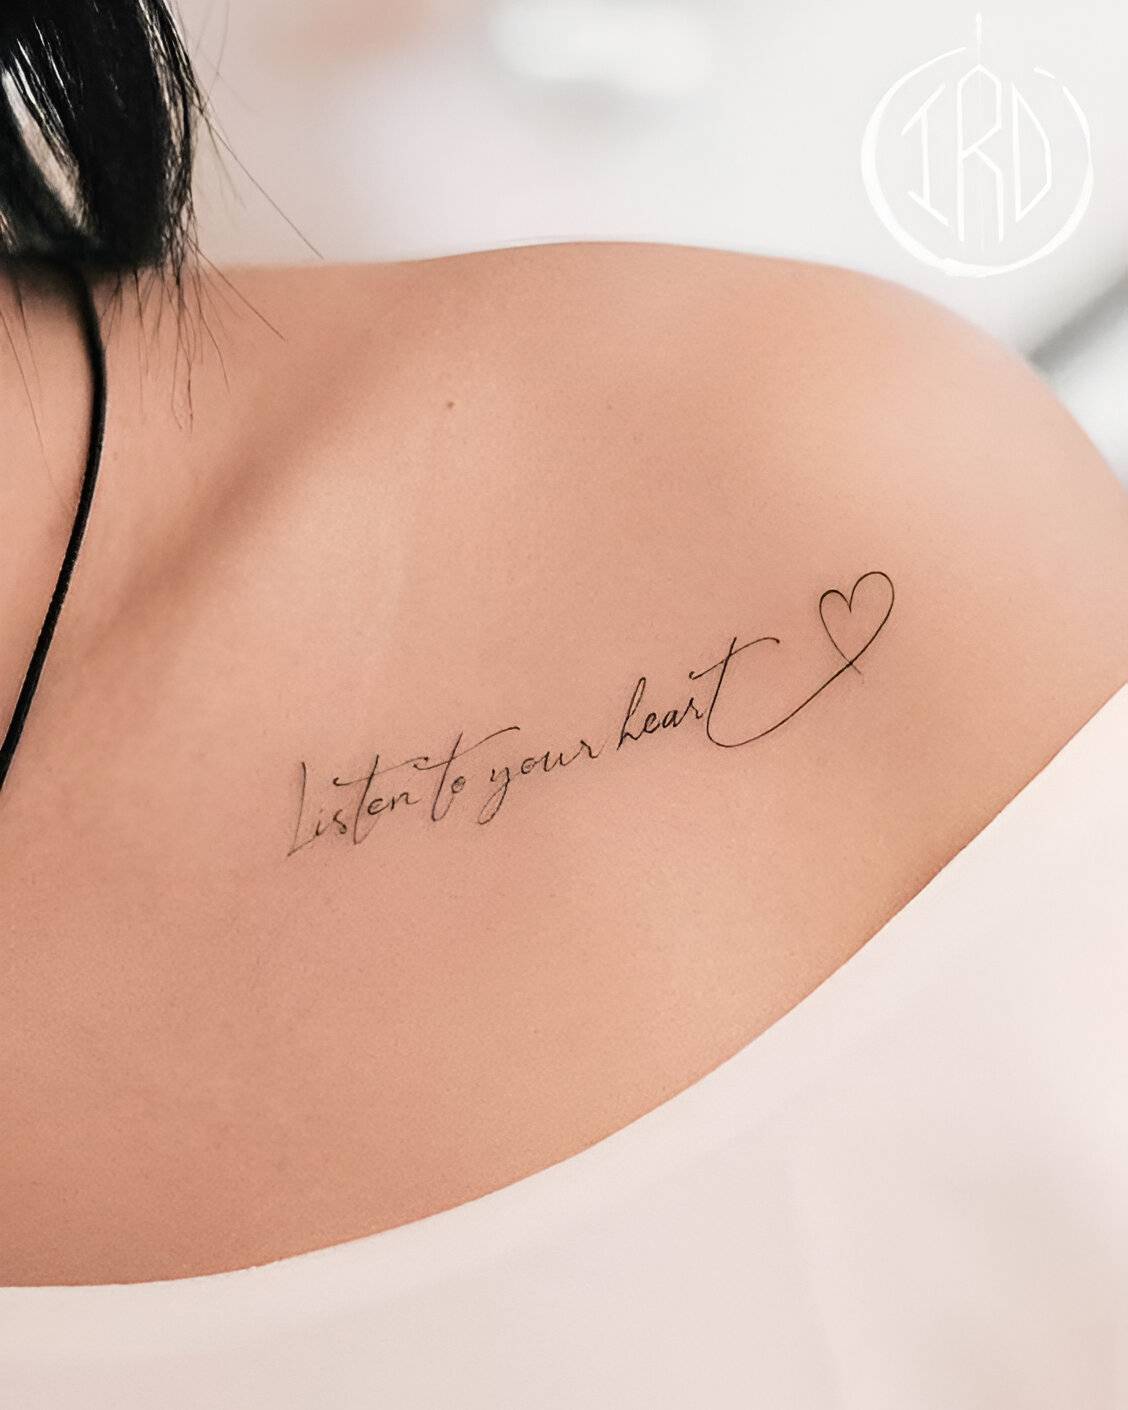 22 Meaningful Quote Tattoos To Bring Out Your Feminine Power - 159